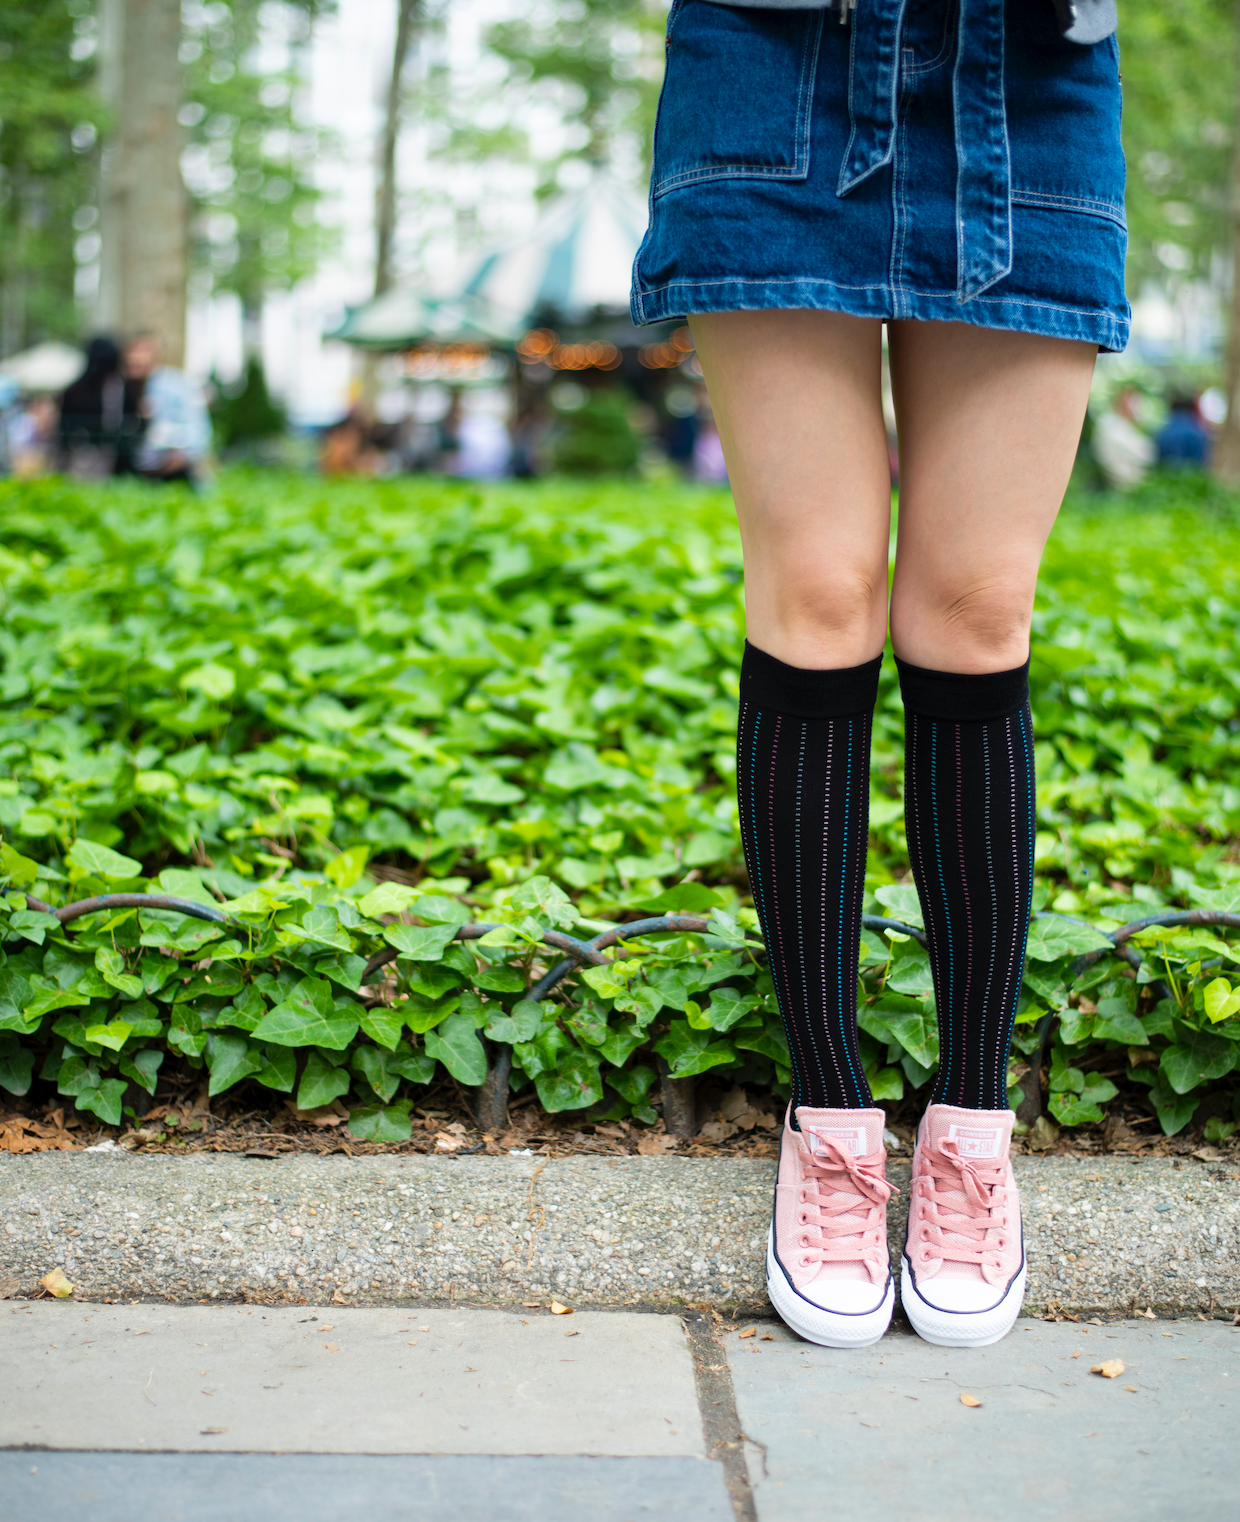 How to Style Compression Socks for Summer 2022, Dr. Motion